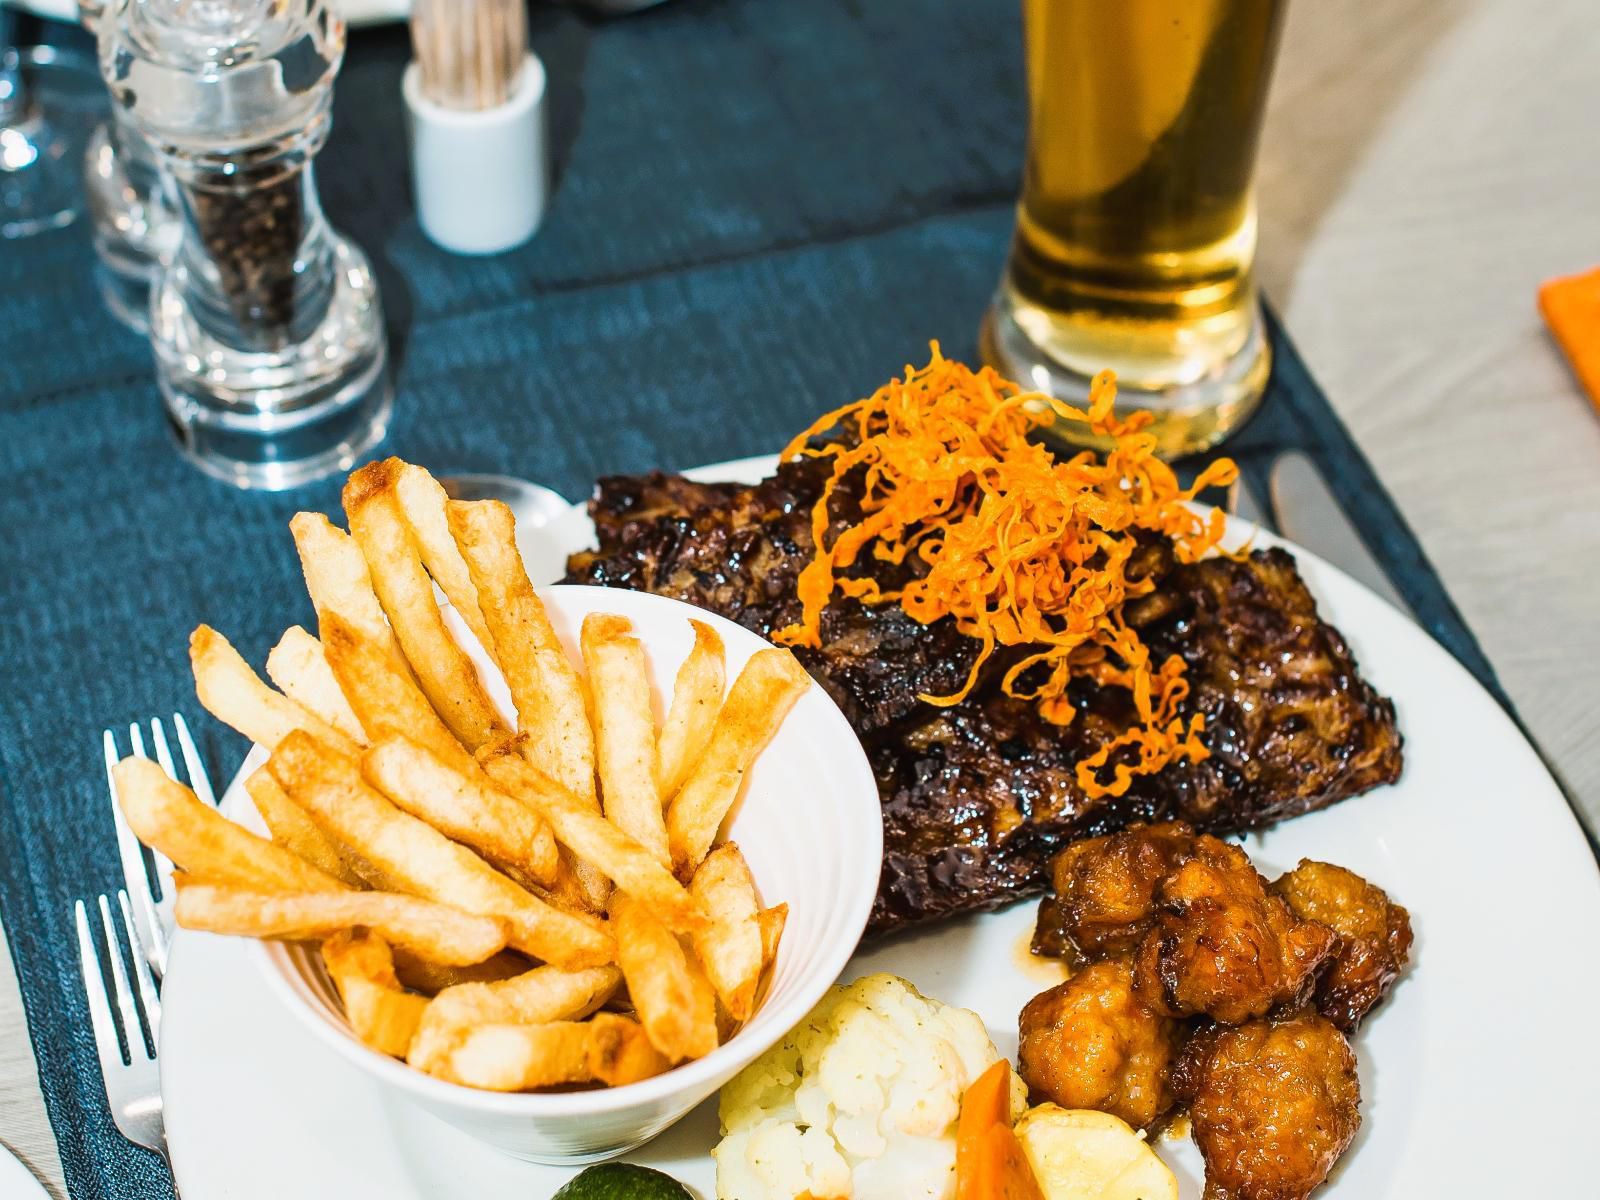 Okiep Country Hotel Okiep Northern Cape South Africa Beer, Drink, French Fries, Dish, Food